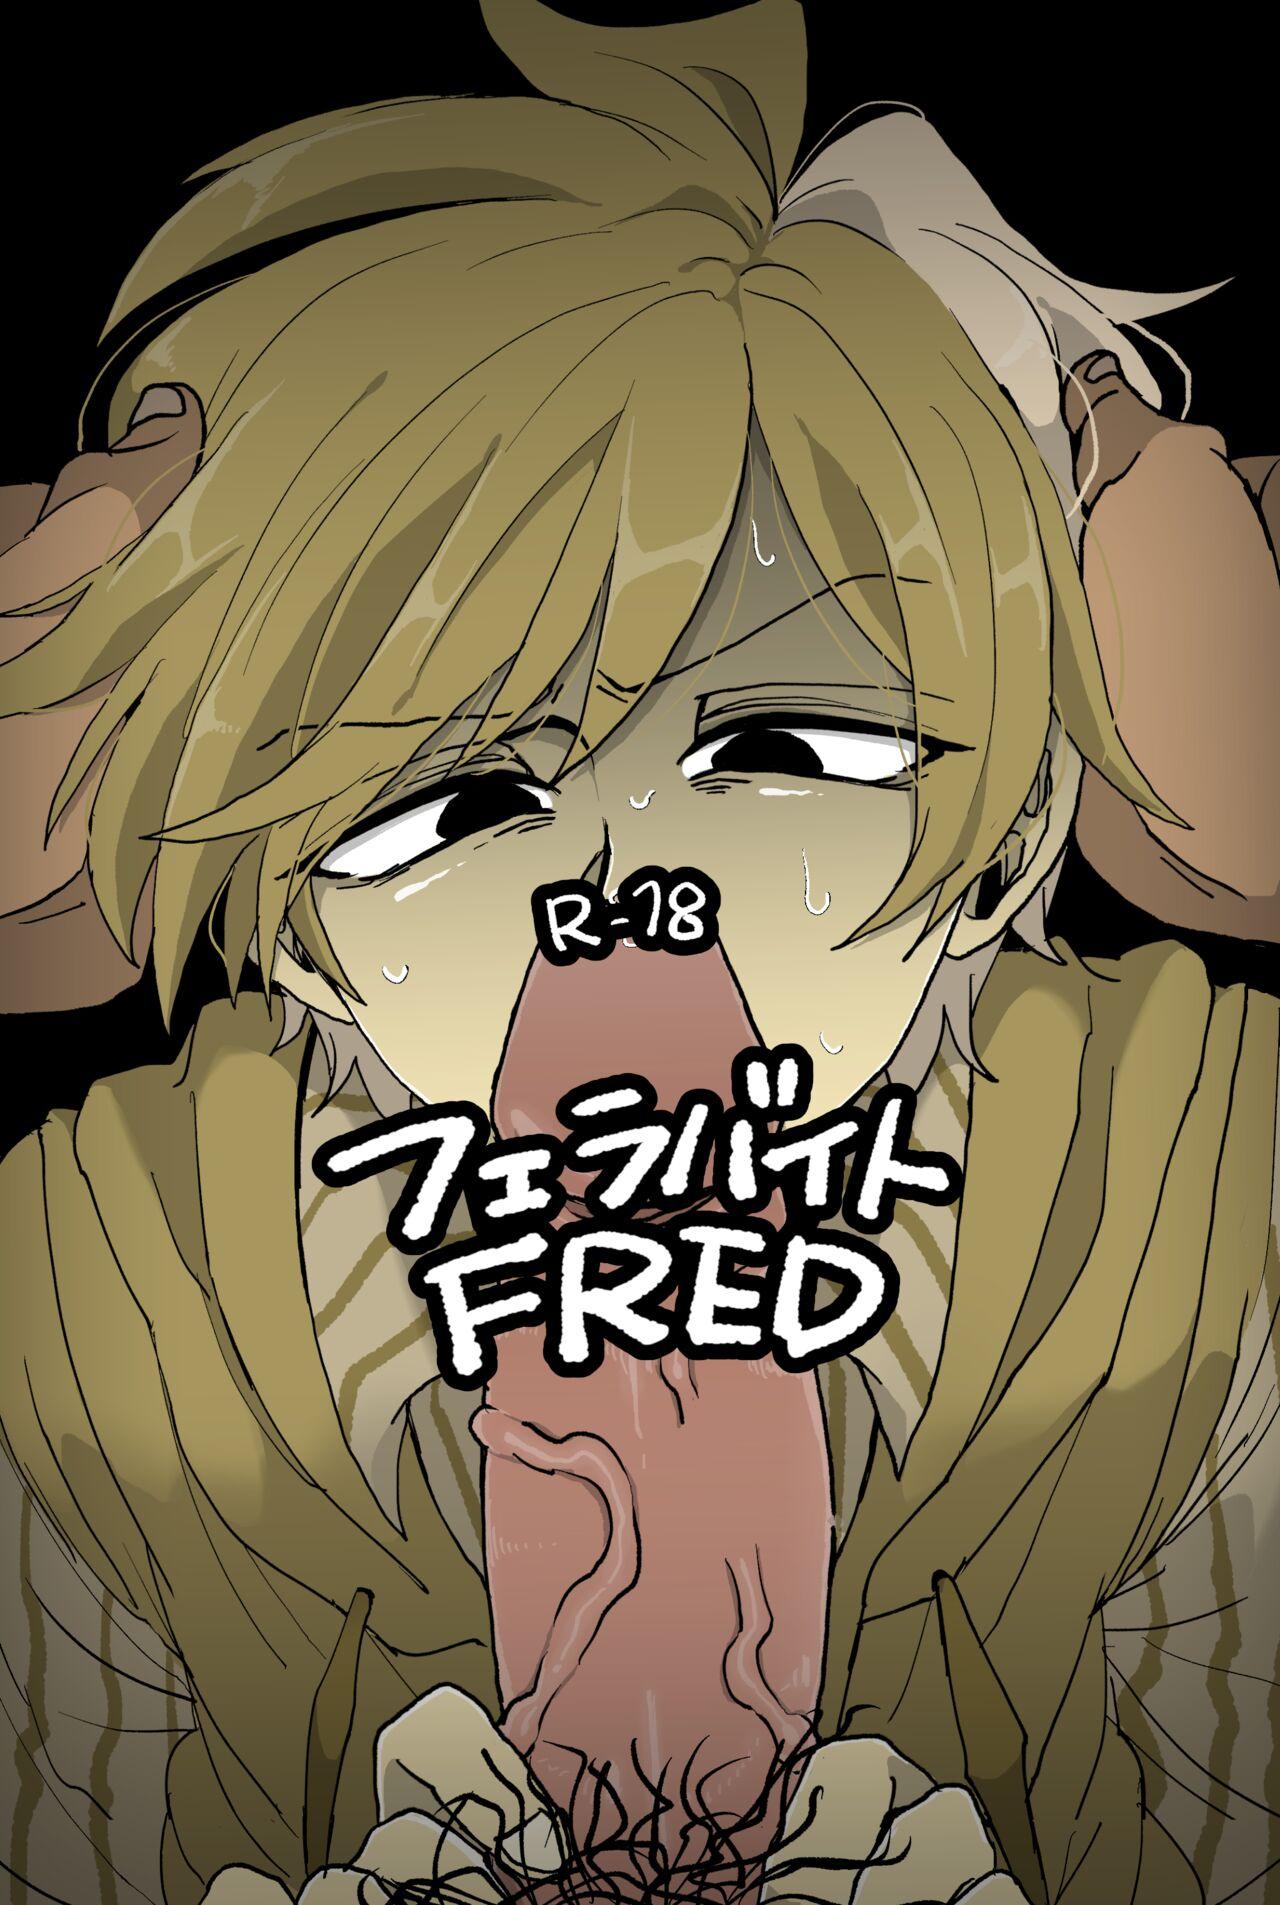 Fred 0